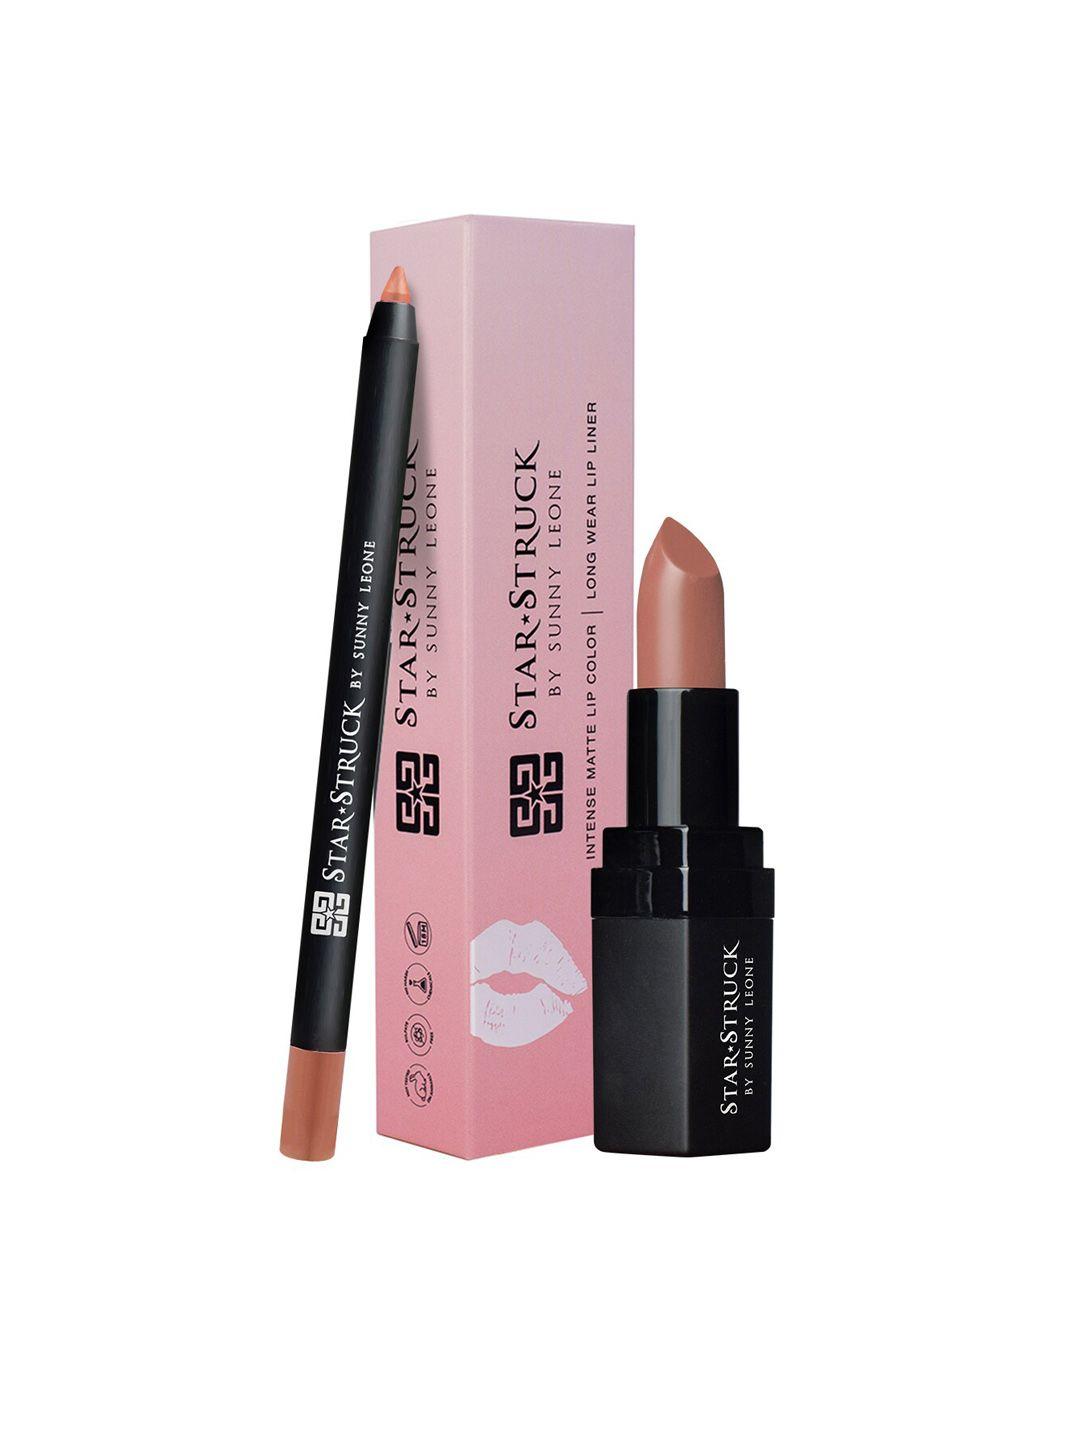 STAR STRUCK BY SUNNY LEONE Set Of 2 Long Lasting Highly Pigmented Kit - Toffee